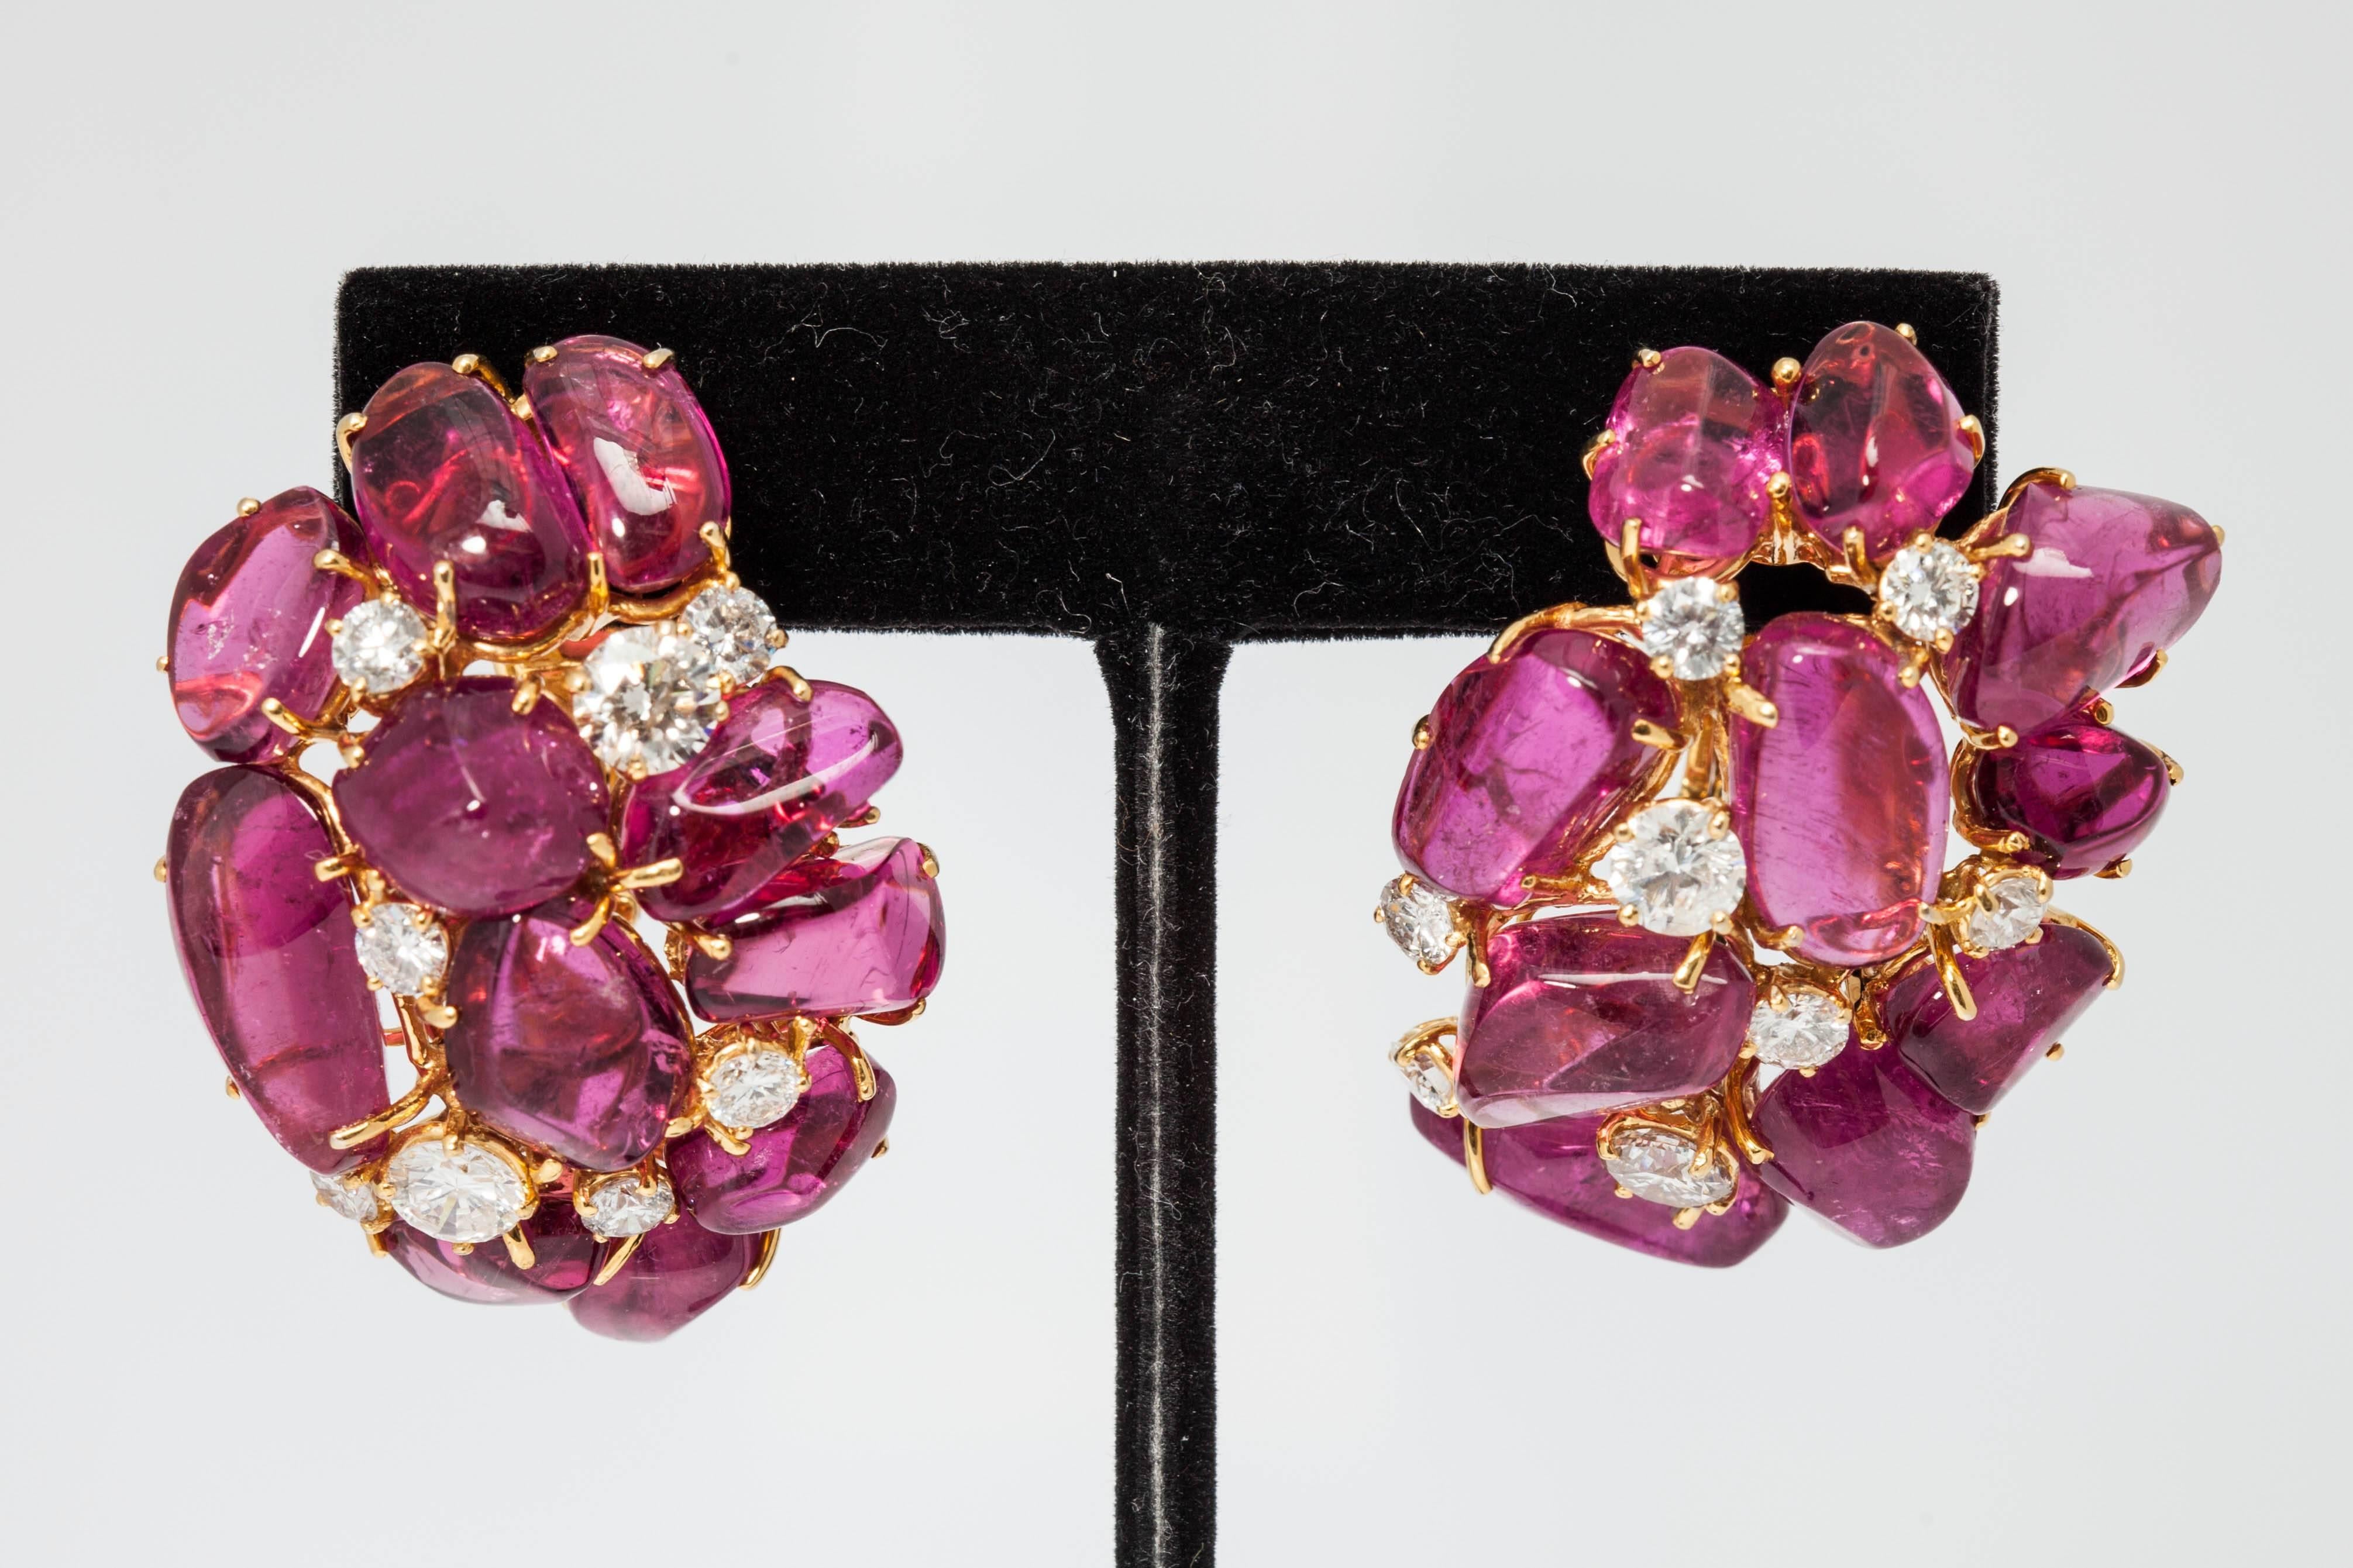 A chic and bold pair of 18kt yellow gold, tourmaline and diamond ear clips. Circa 1975. Diamond weight: Approximately 6cts.